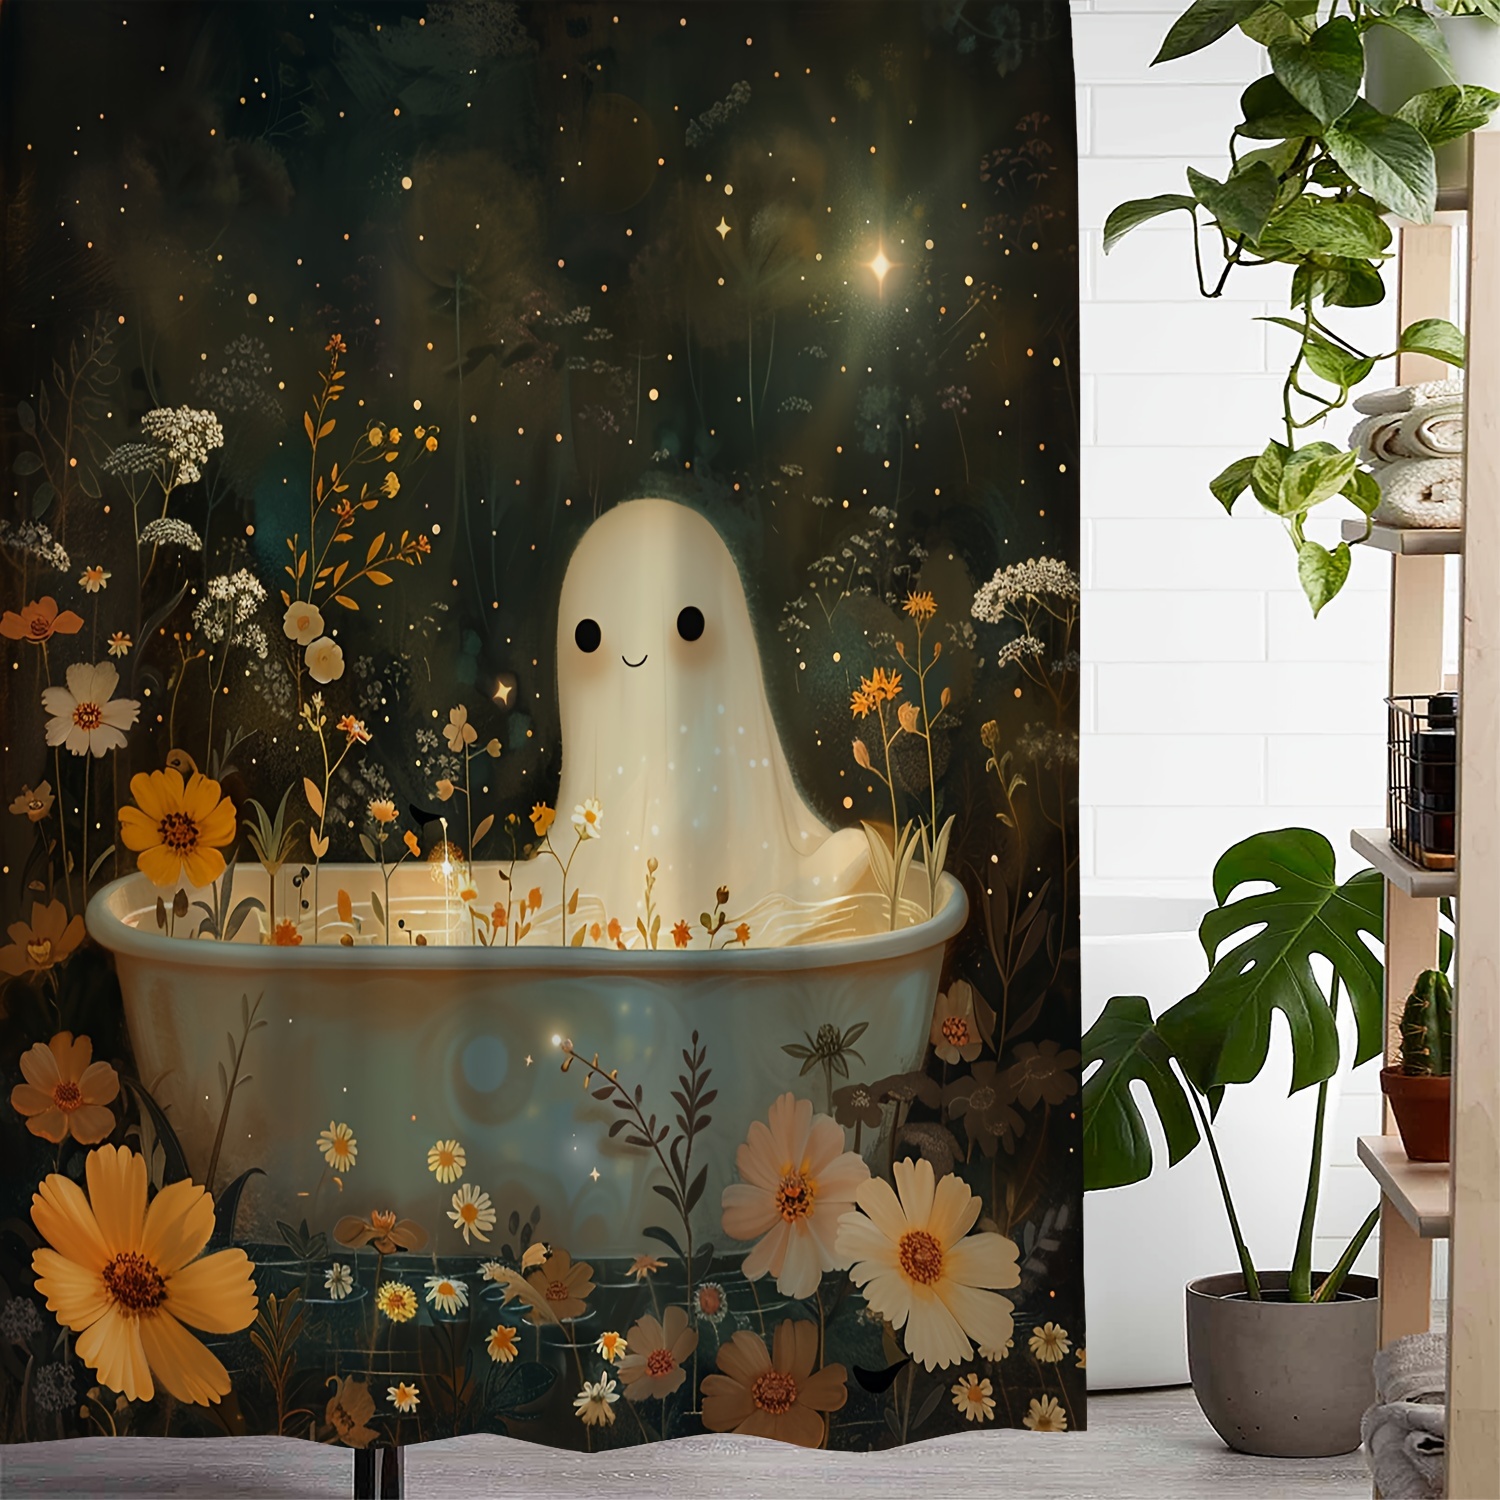 

Vintage Ghost Bathtub Floral & Firefly Shower Curtain, Polyester Artistic Design, Water-resistant With 12 Hooks, Machine Washable, Woven Bath Accessory